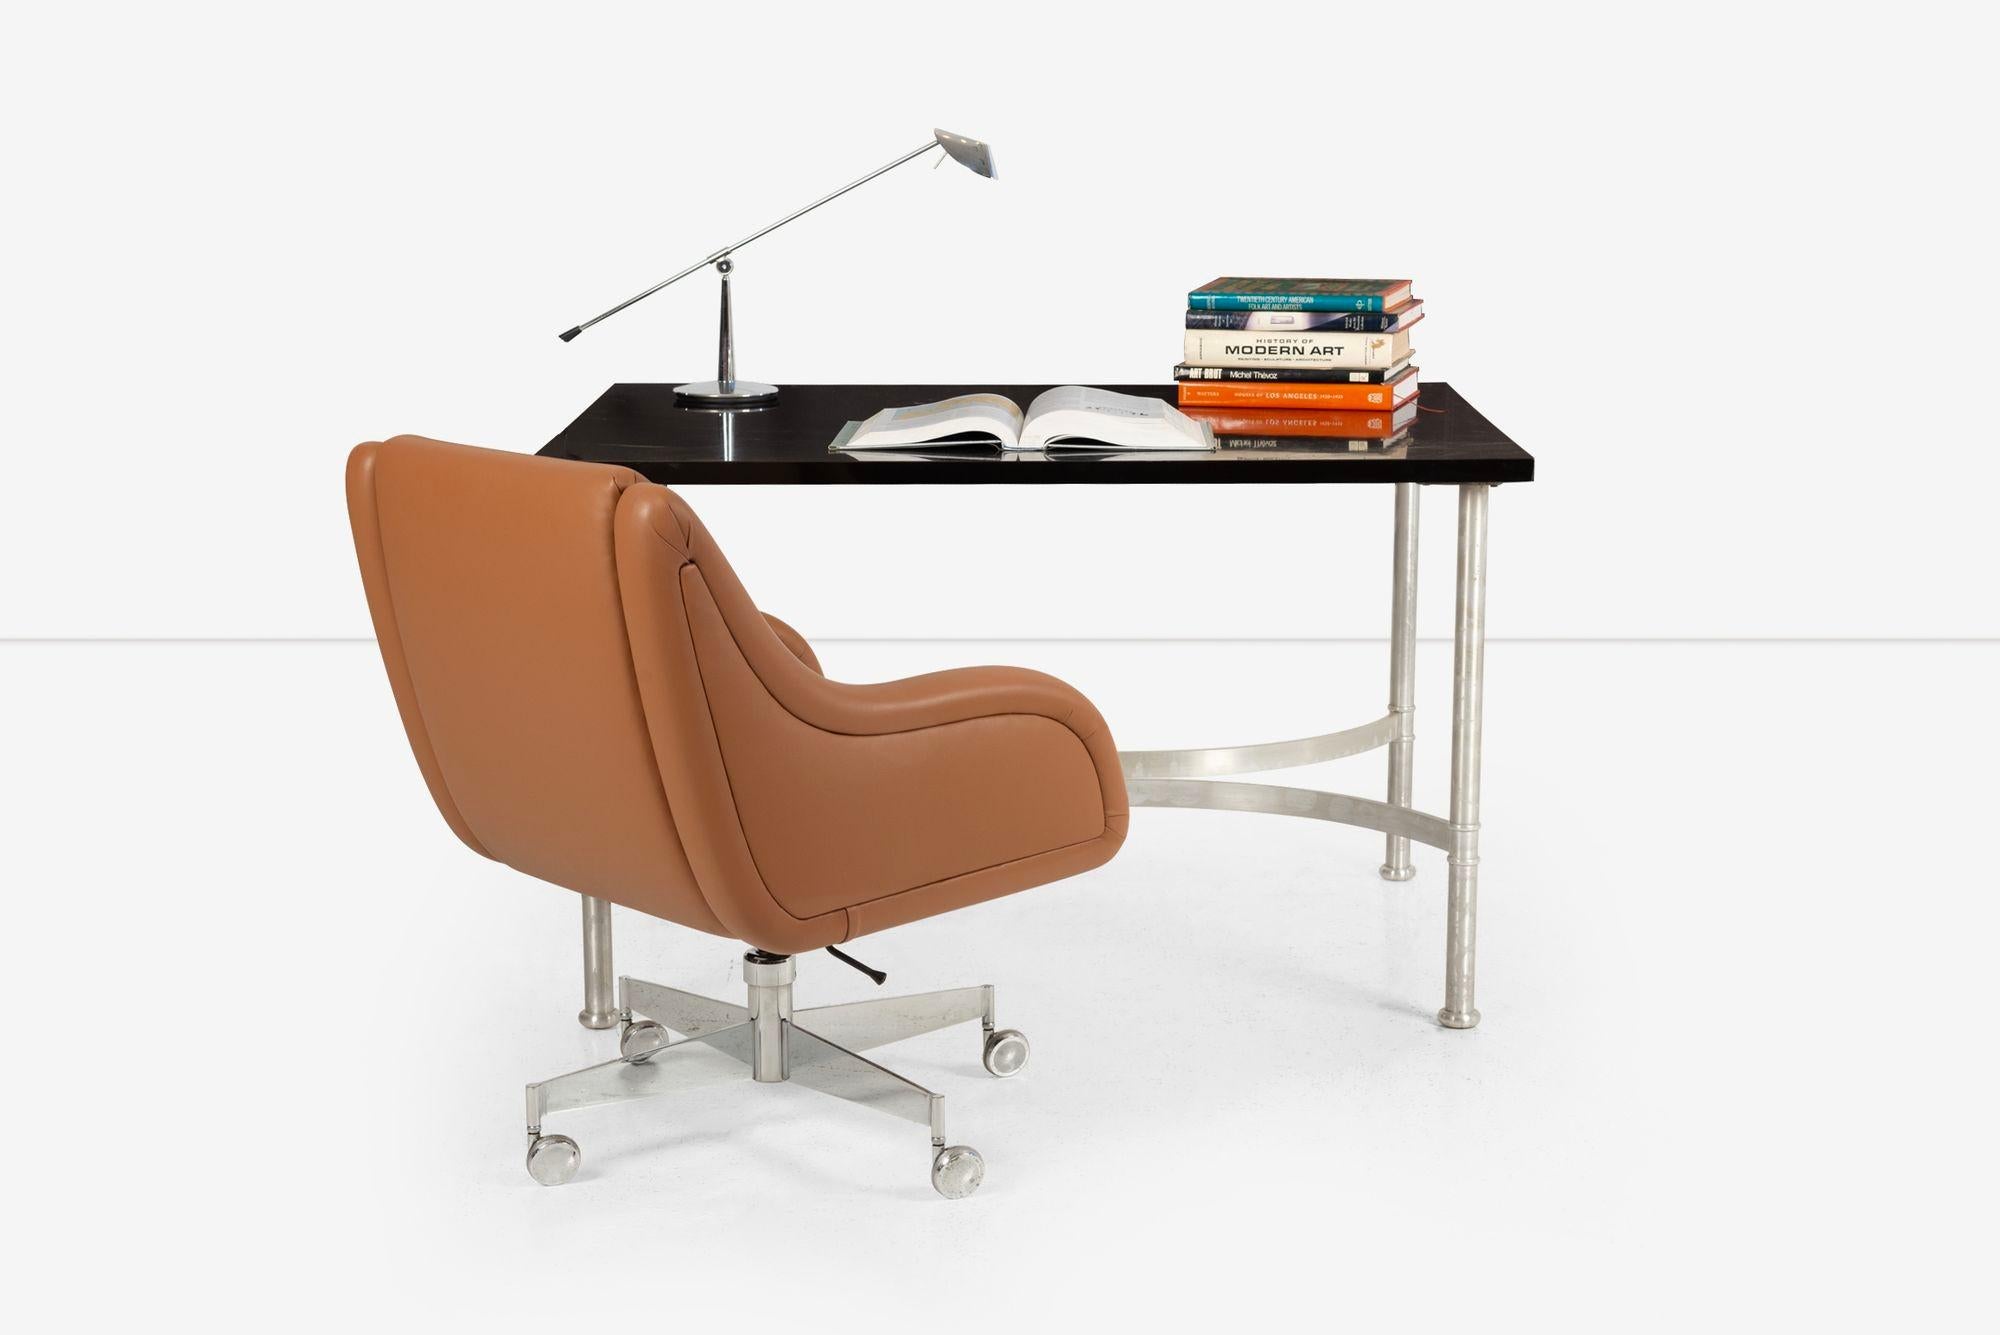 Warren McArthur for Warren McArthur Corporation Table or Desk from the Virginia State Library, Richmond V.A.
Aluminum base, wood top with laminate surface
Dimensions:
30¼